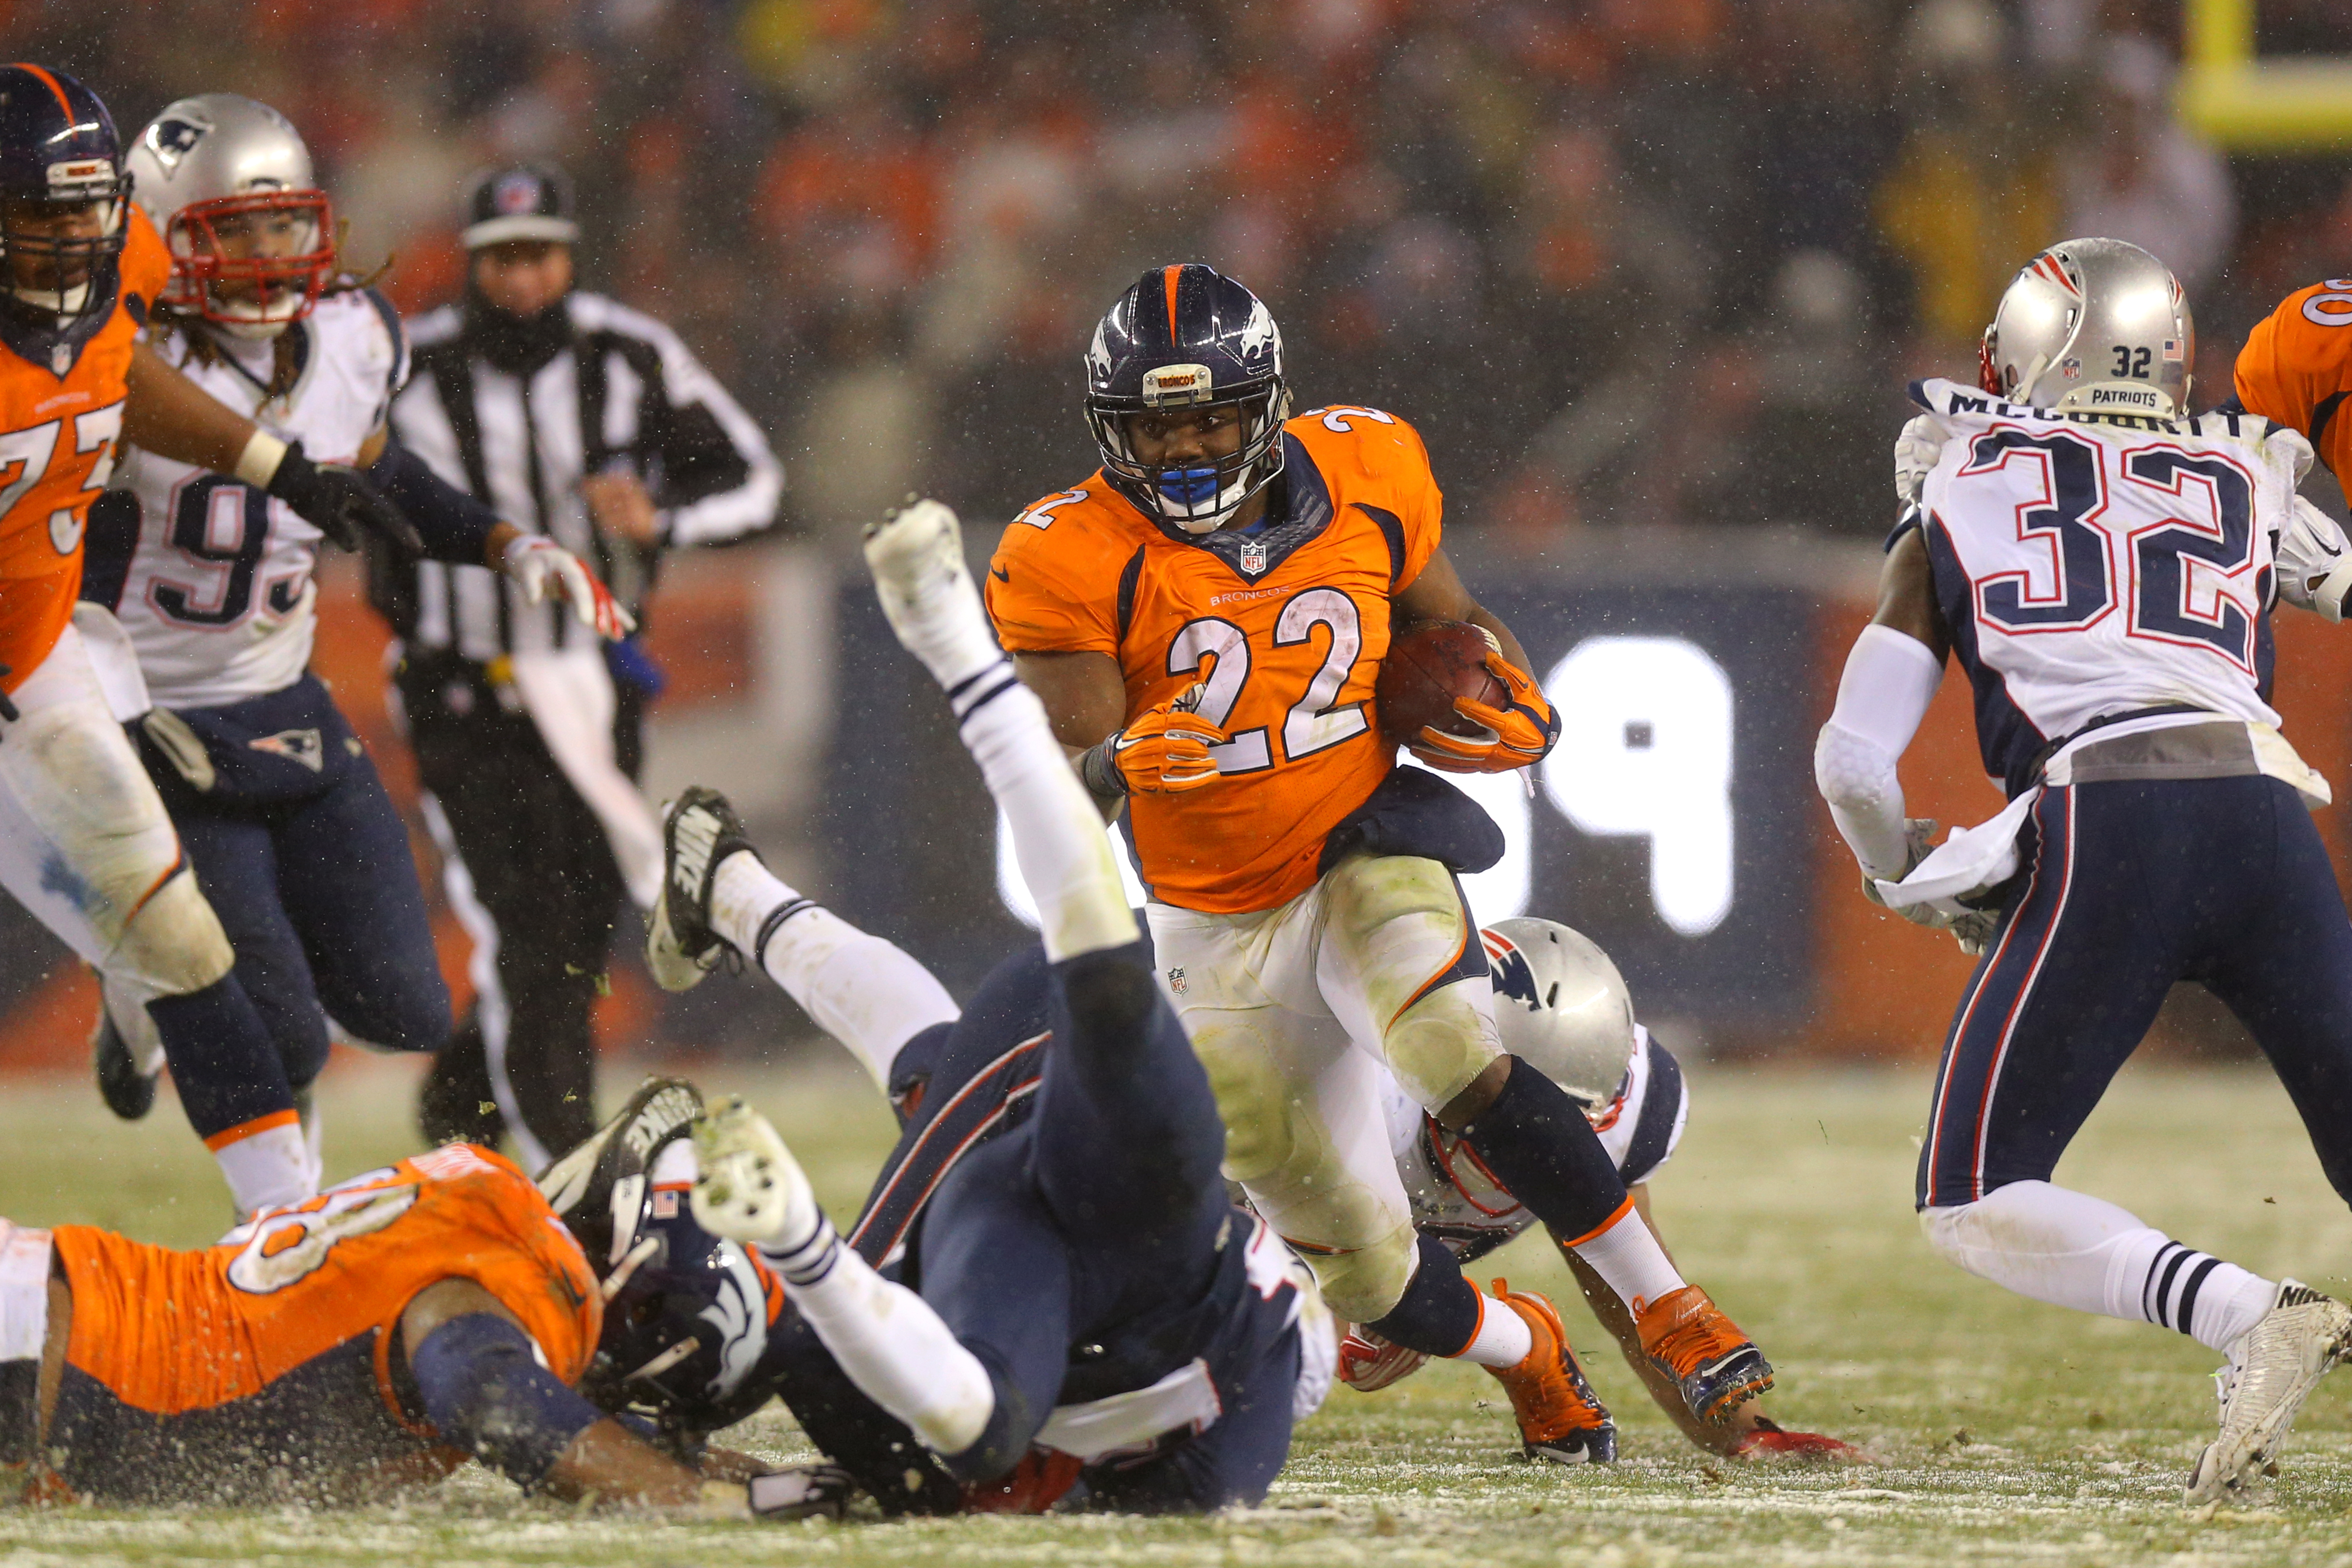 Mike Klis: Patriots in Negotiations With Broncos Running Back C.J. Anderson  - Pats Pulpit